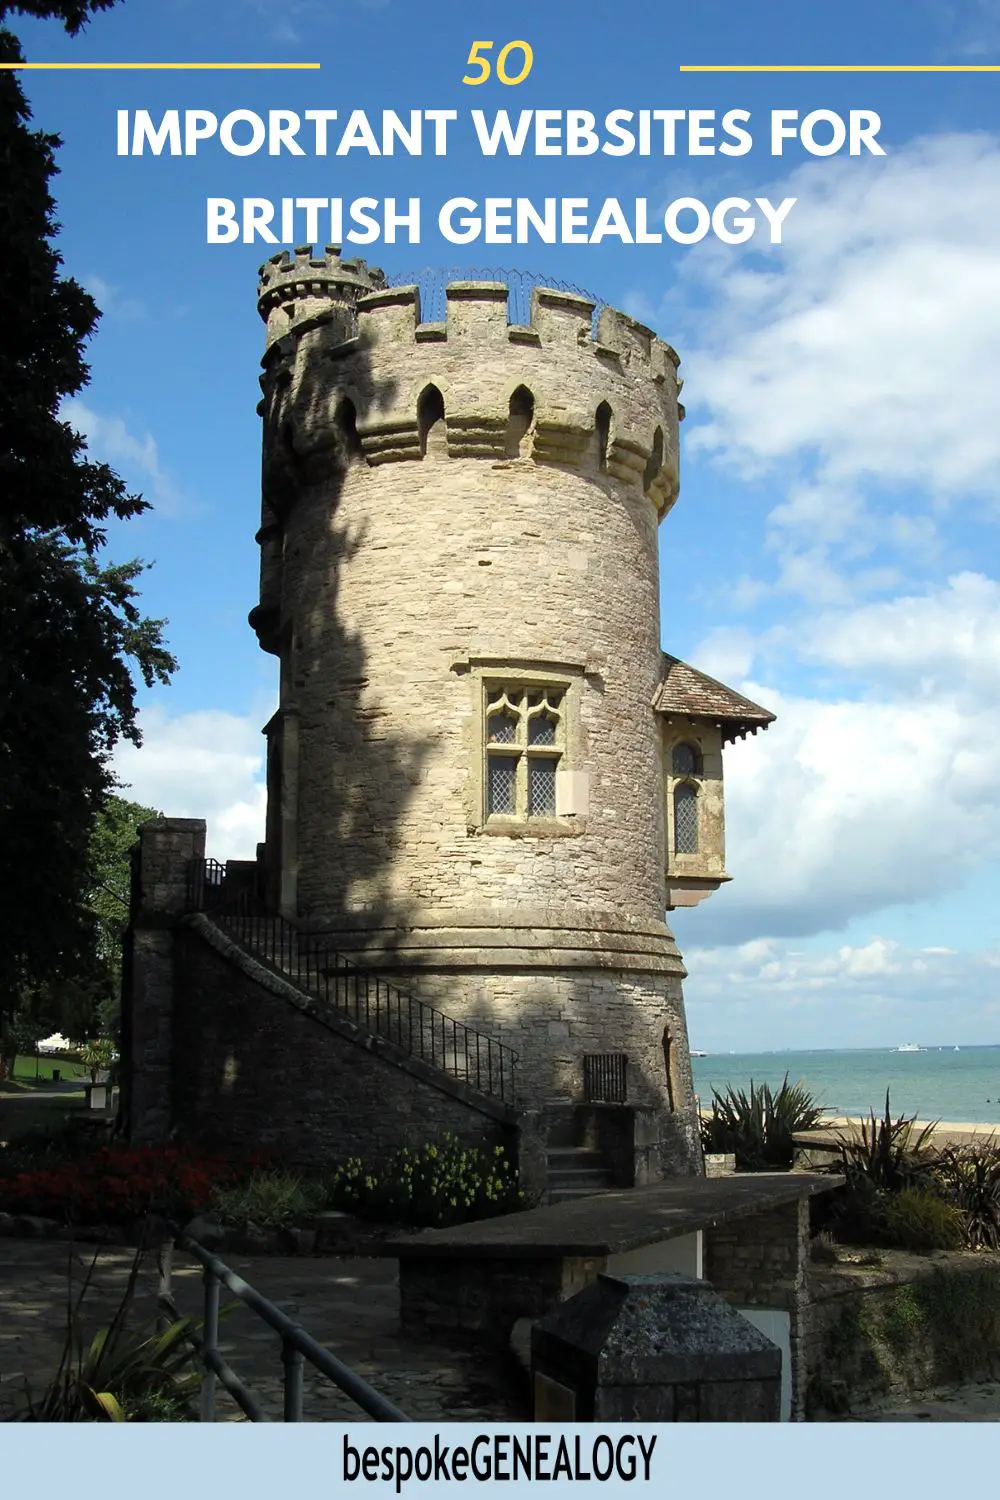 50 Important websites for British genealogy. Photo of a 19th century castle folly on the British south coast.